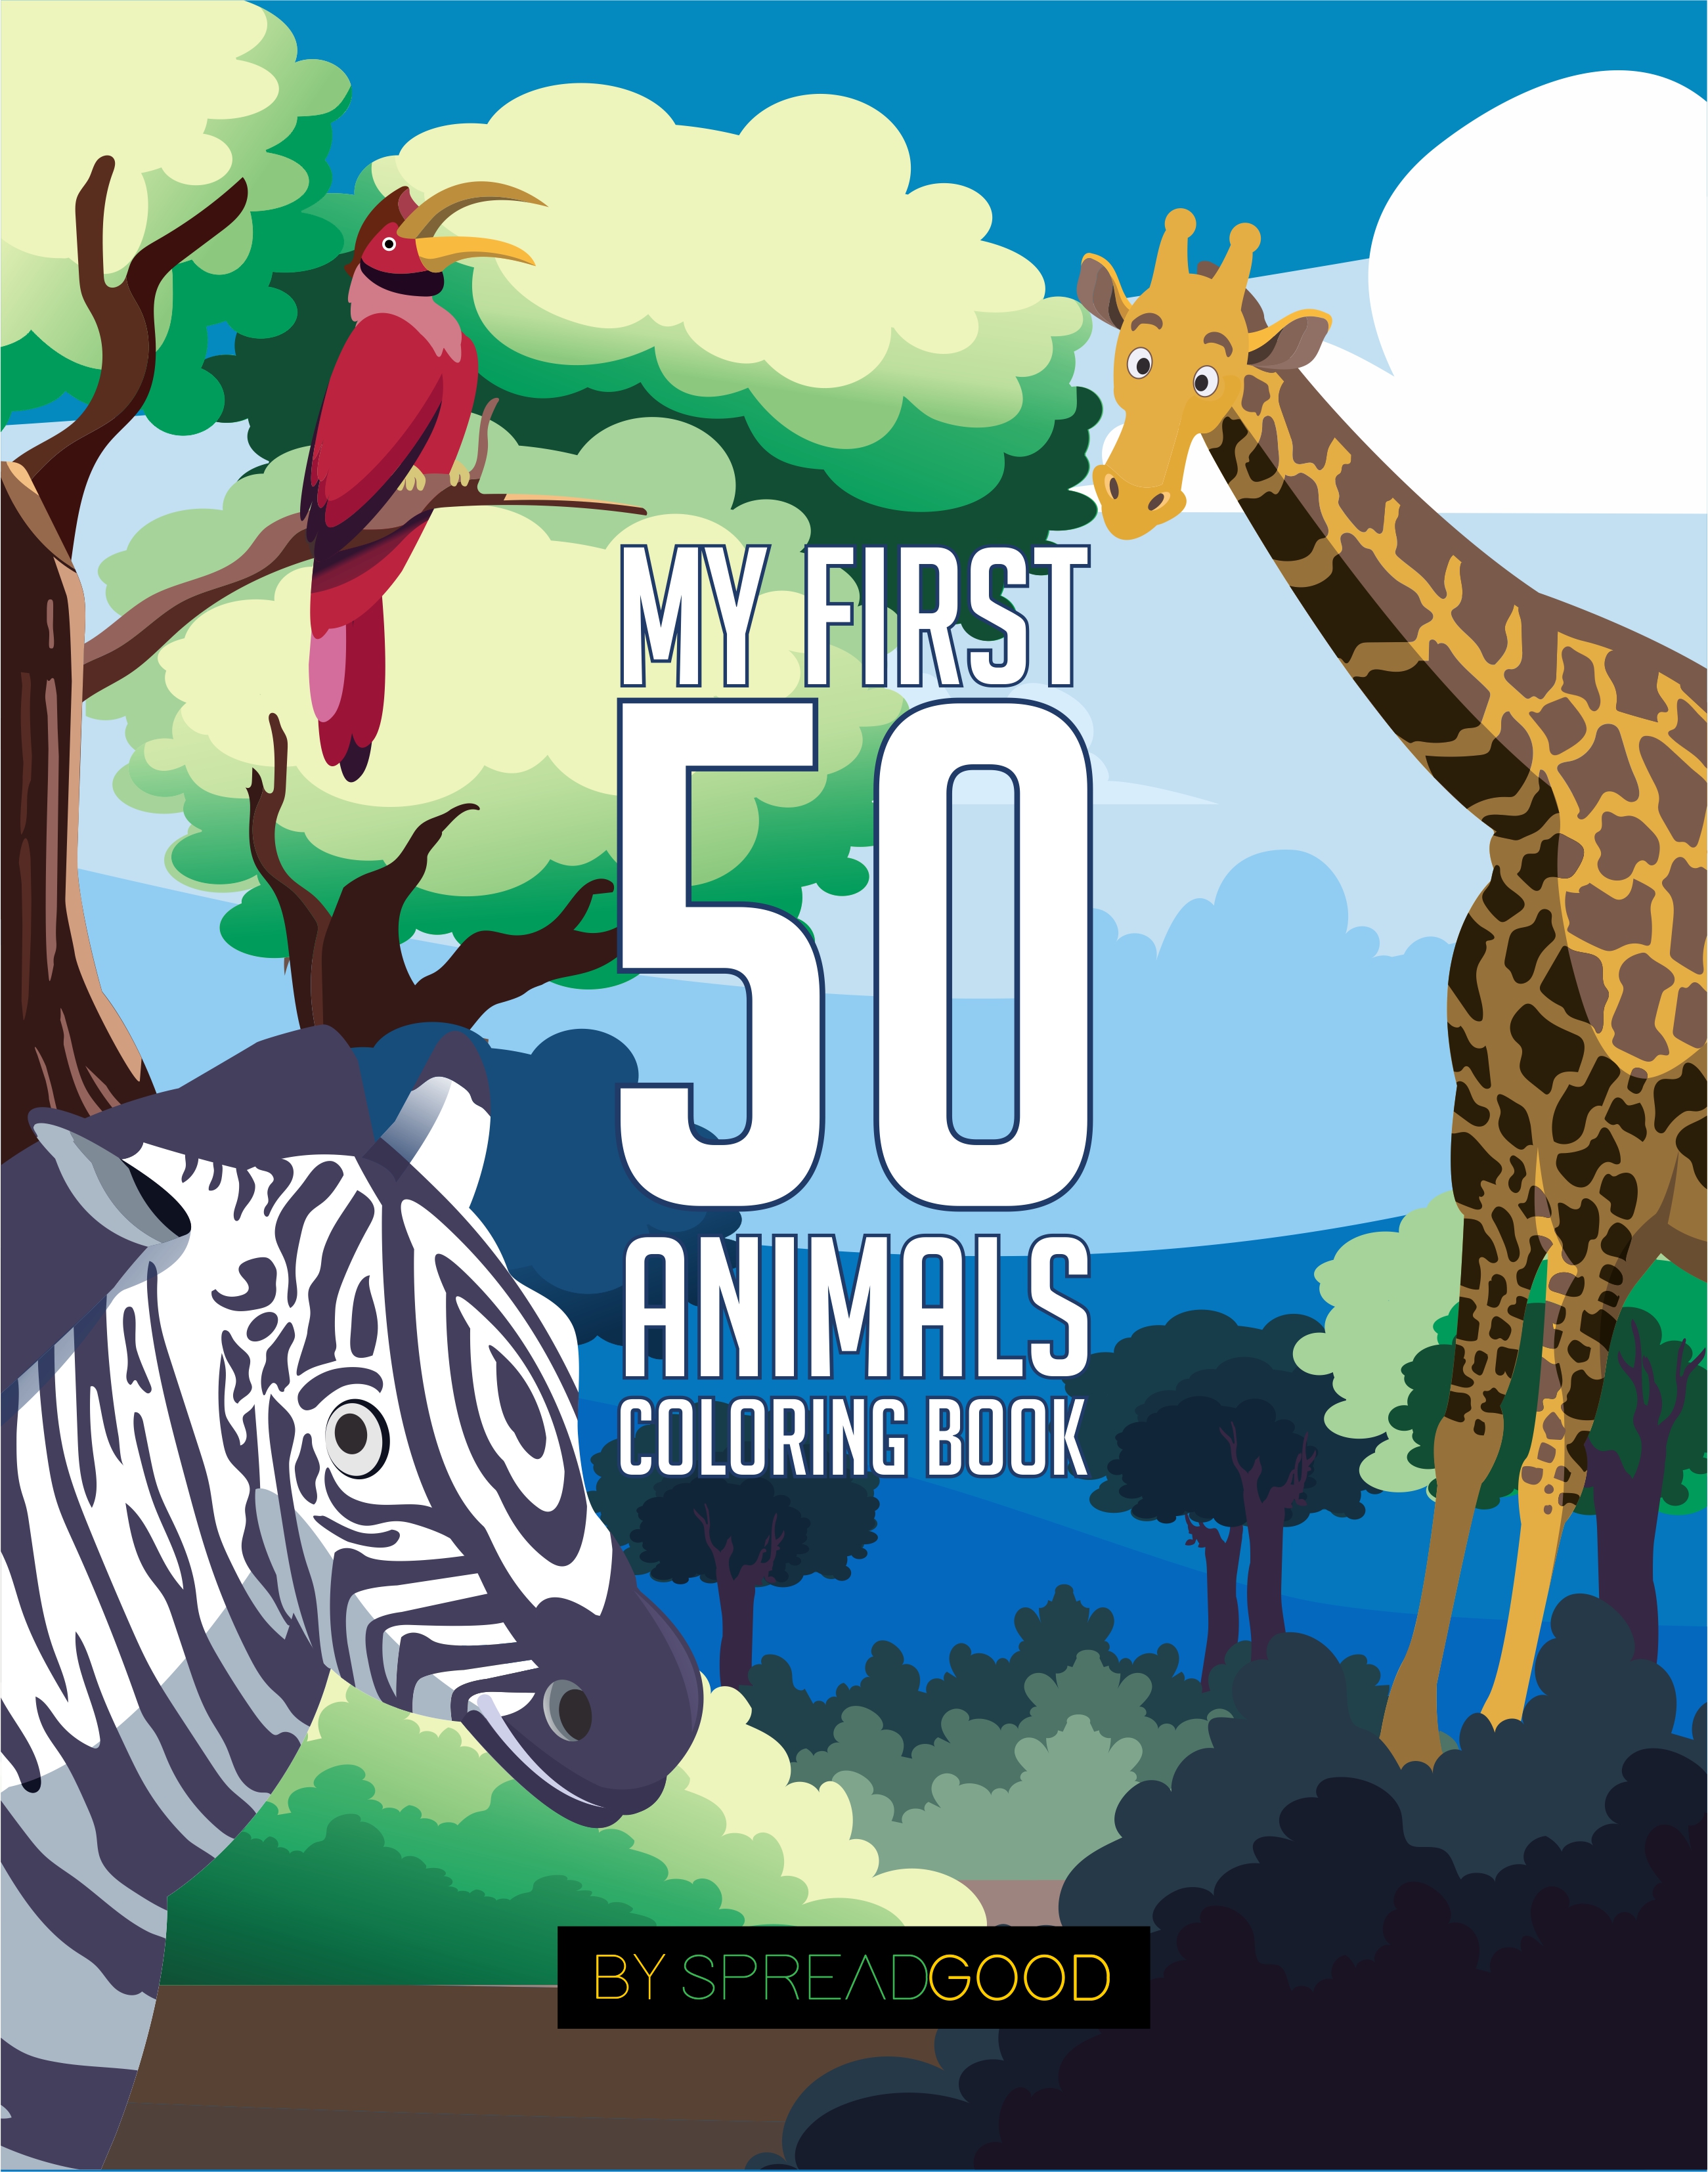 FREE: Spread good my first 50 animals coloring book|coloring books for kids,ages 2-4 ages 4-8,boys,girls,toddlers| 50 high-quality illustrations|including … coloring| (Animal coloring book volume 1) by spread good publications